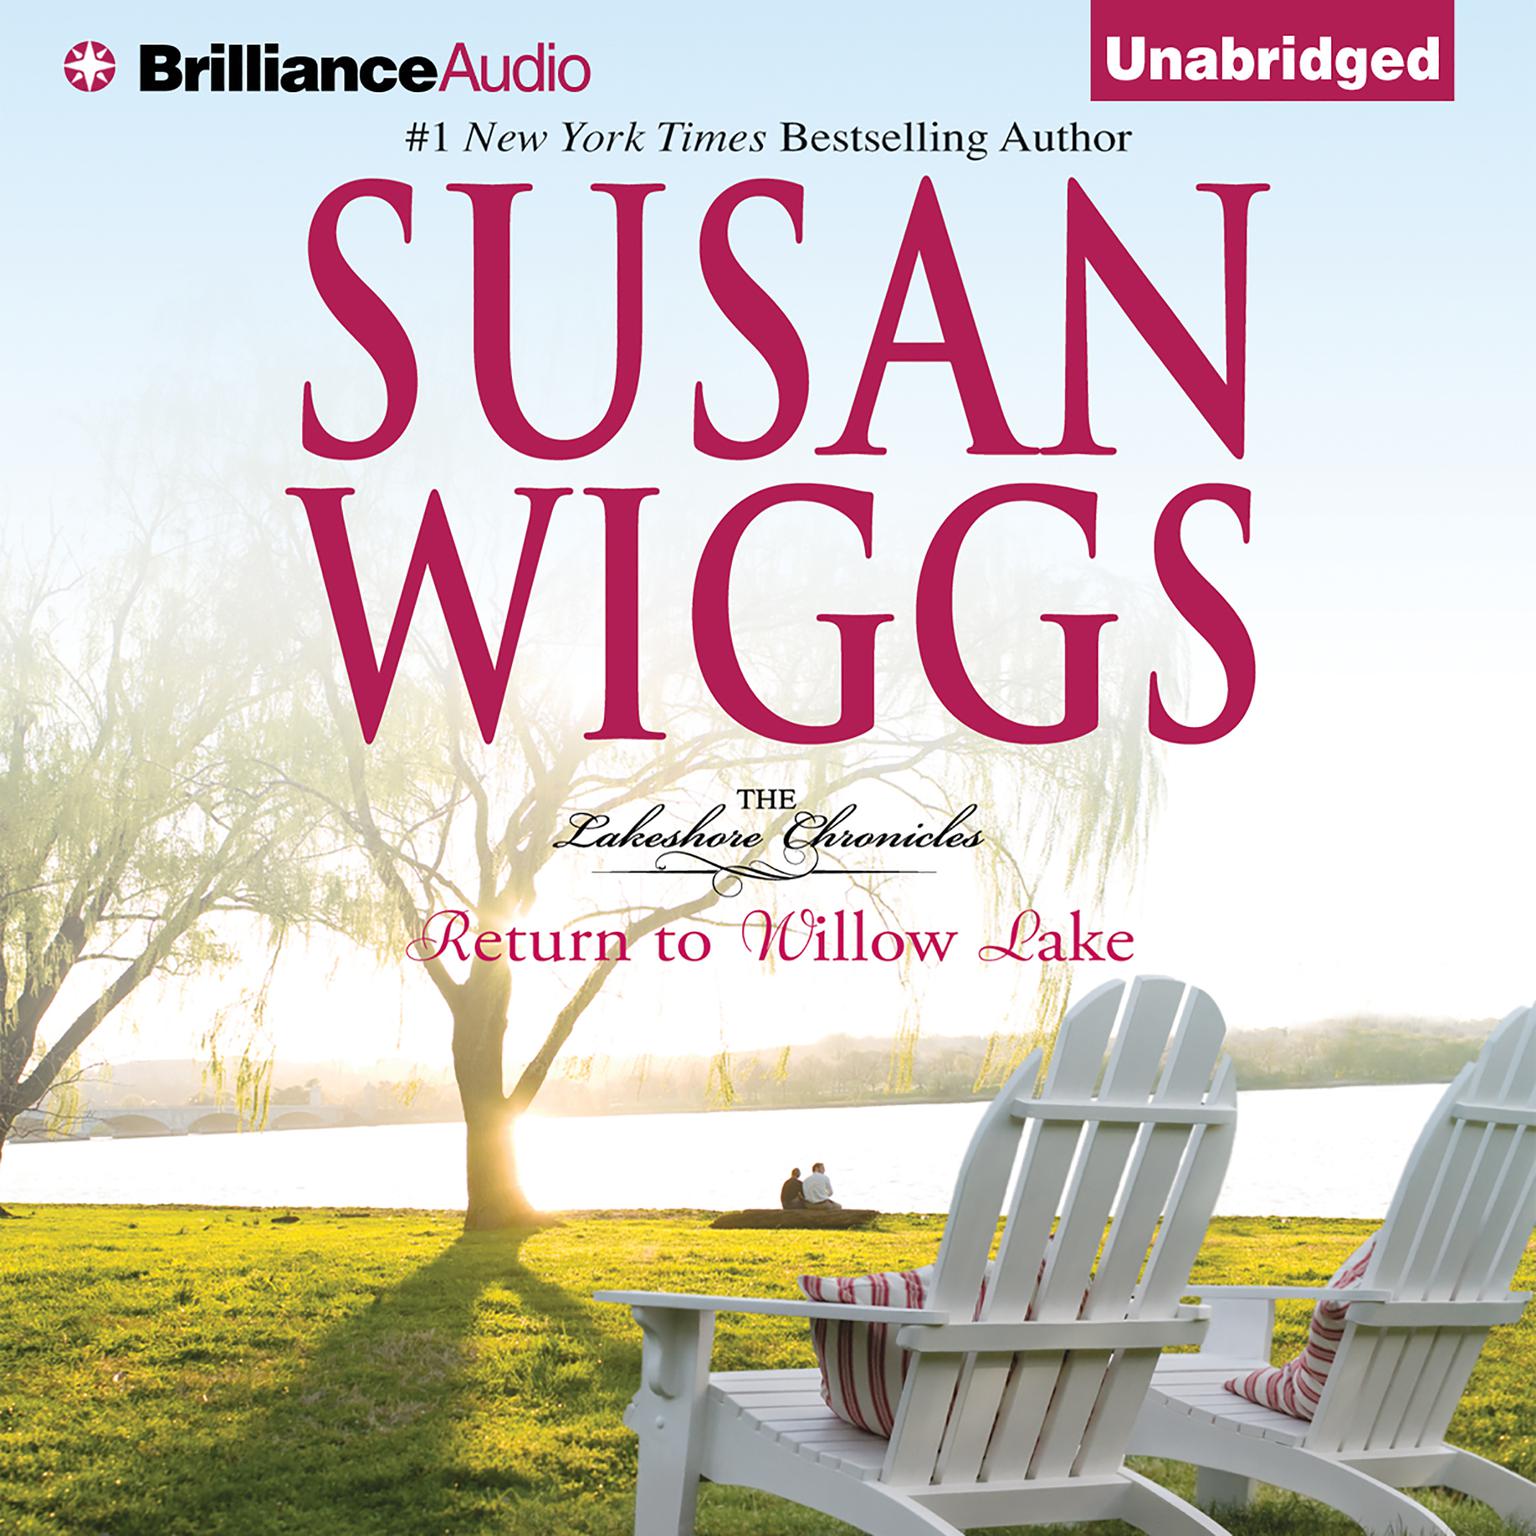 Return to Willow Lake Audiobook, by Susan Wiggs